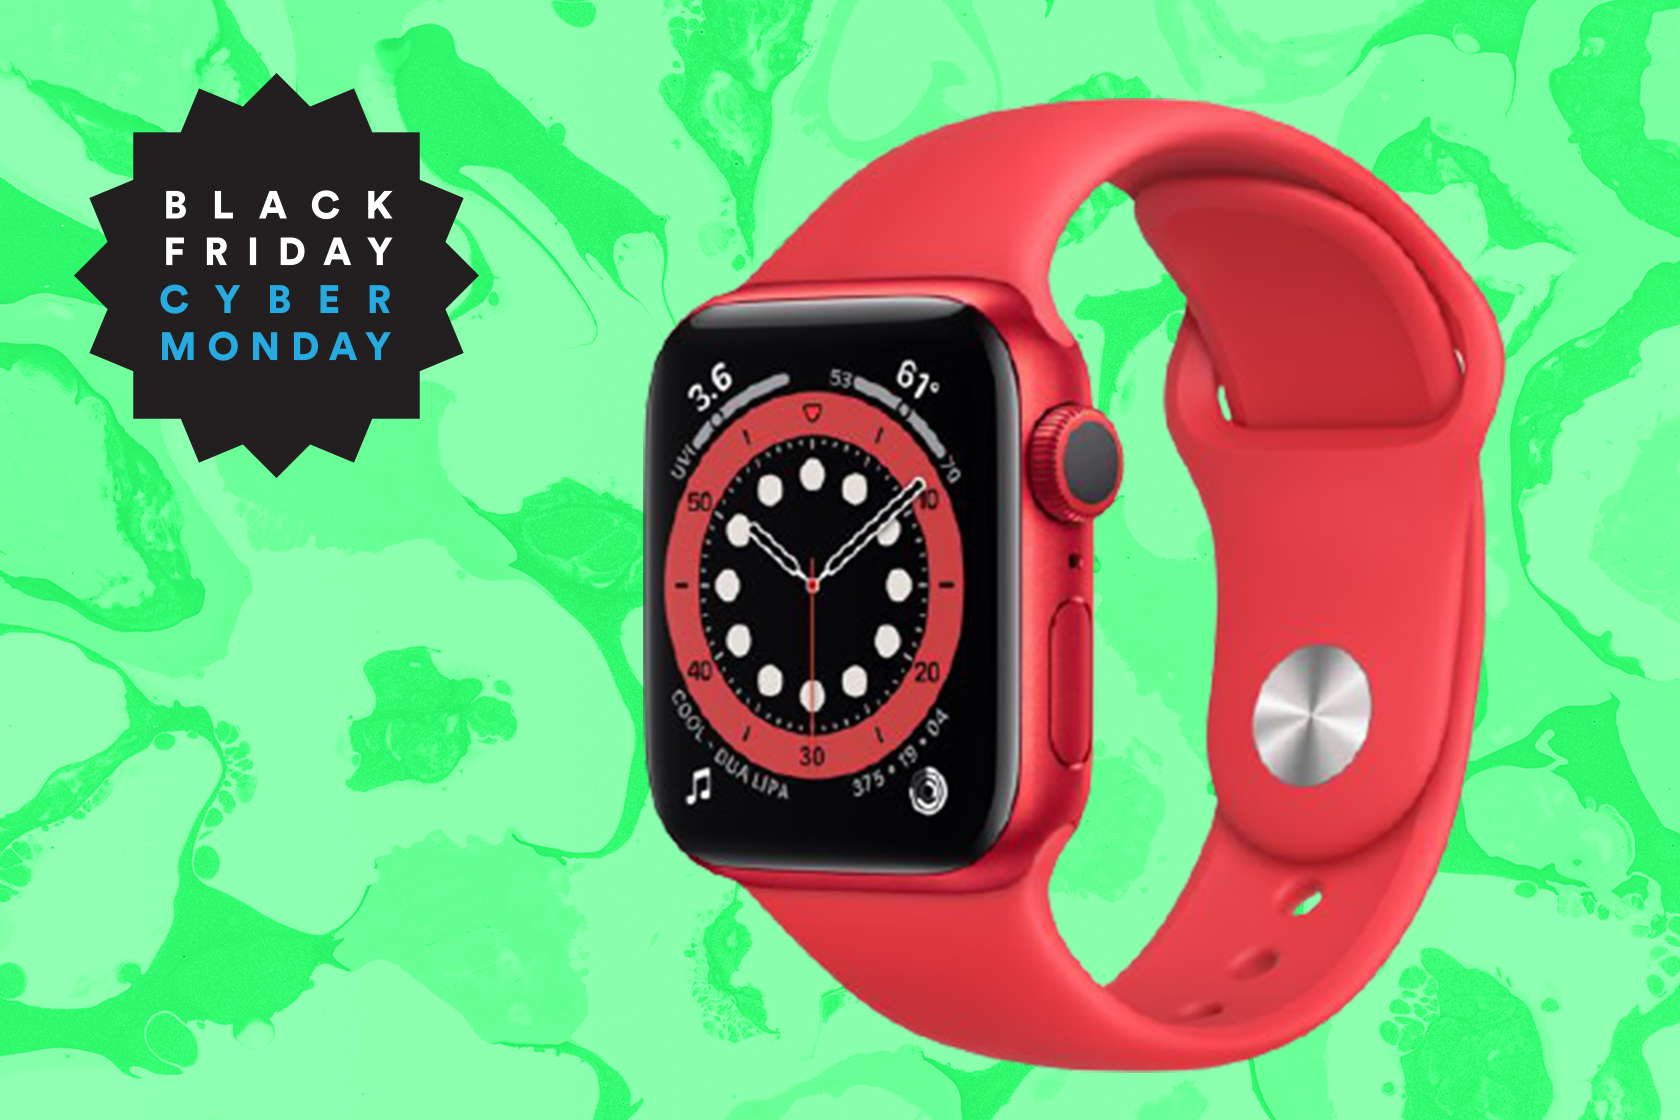 Walmart has PRODUCT(RED) Apple Watch series 6